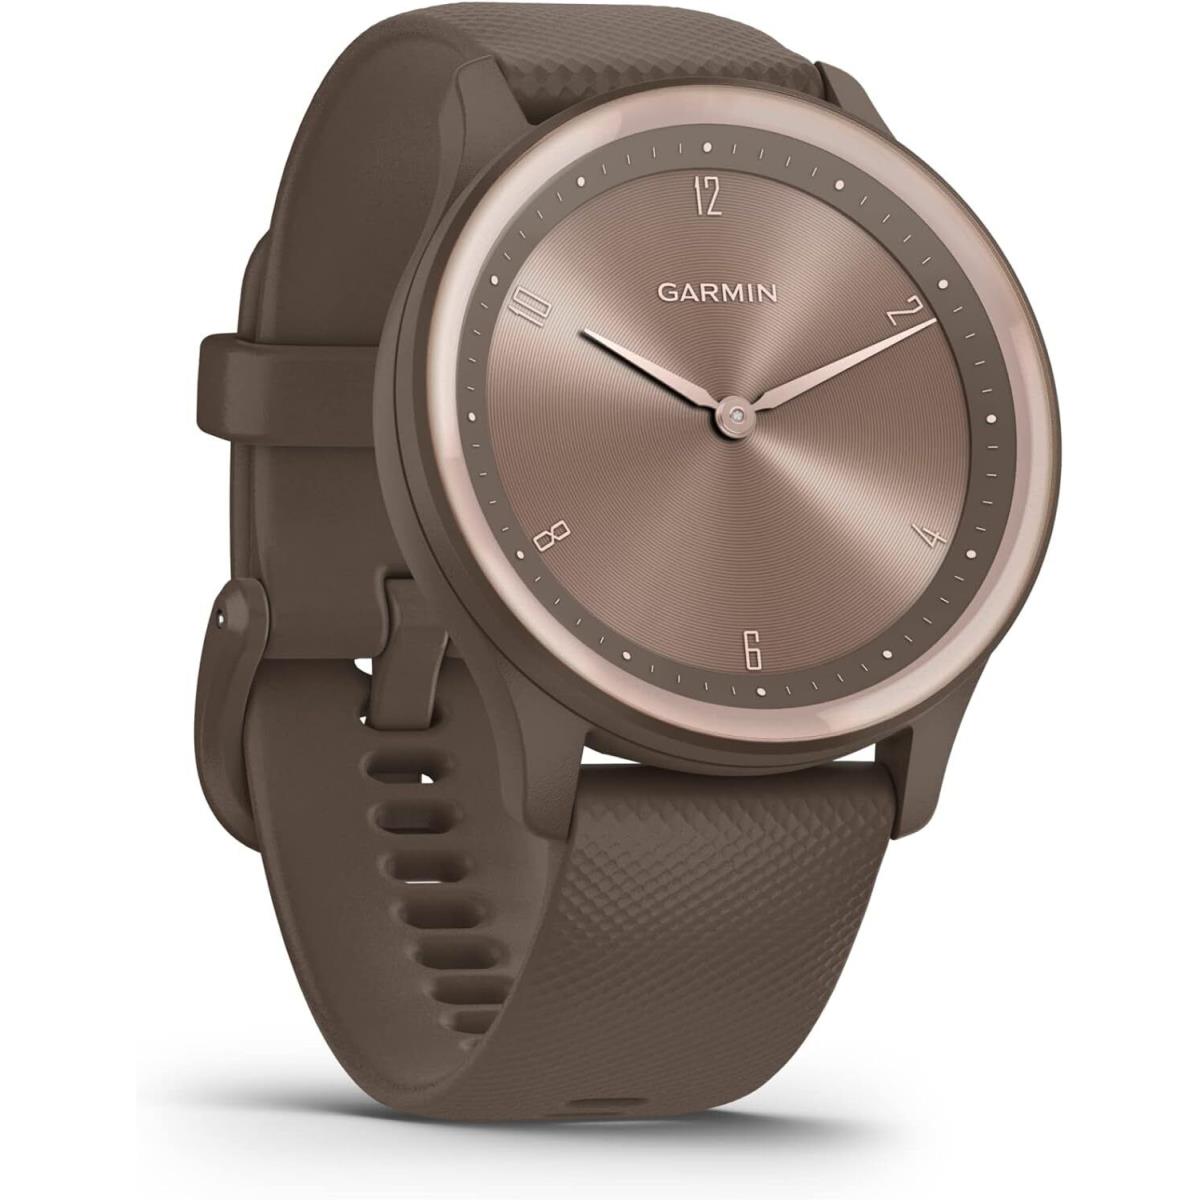 Garmin Vivomove Sport Hybrid Smartwatch with Analog Hands Track Your Health Cocoa Case with Peach Gold Accents